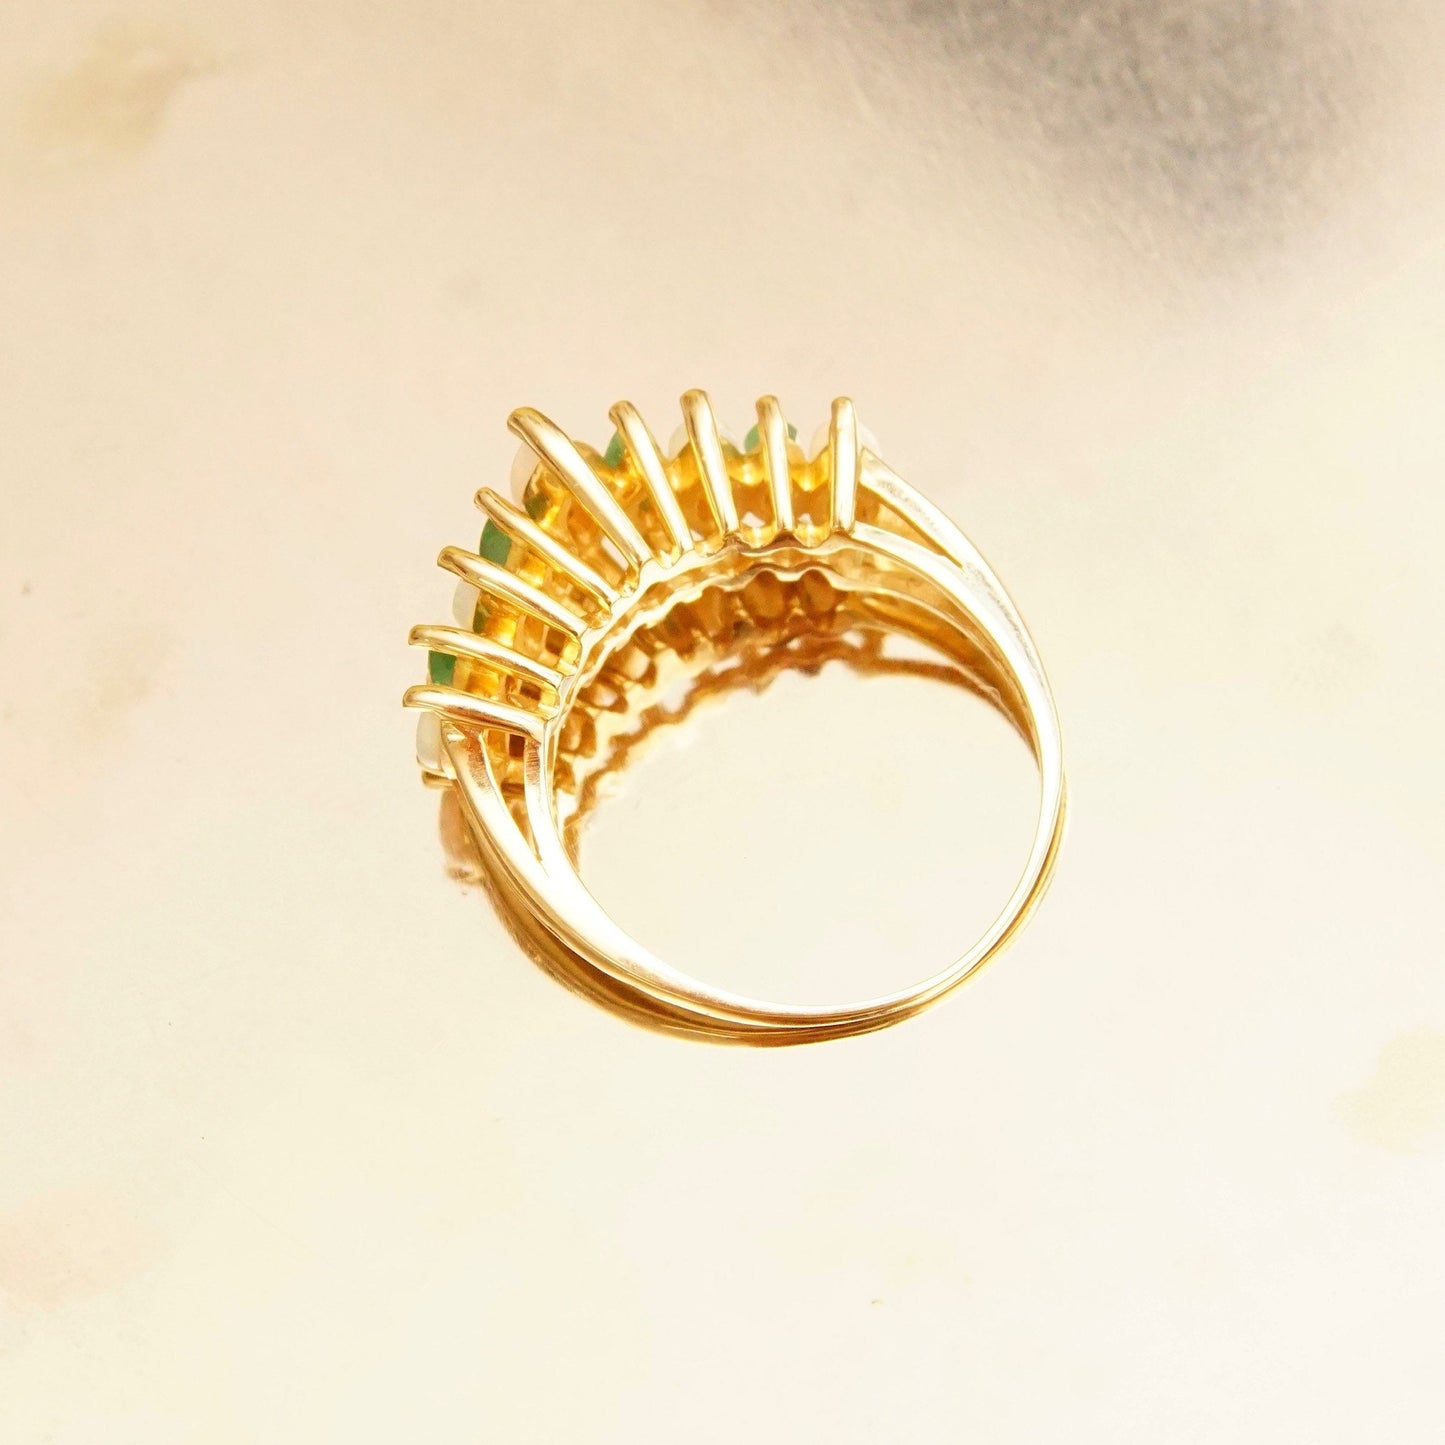 14K gold cocktail ring with marquise-cut opals and emeralds in a cluster design, estate jewelry, size 6 1/4 US